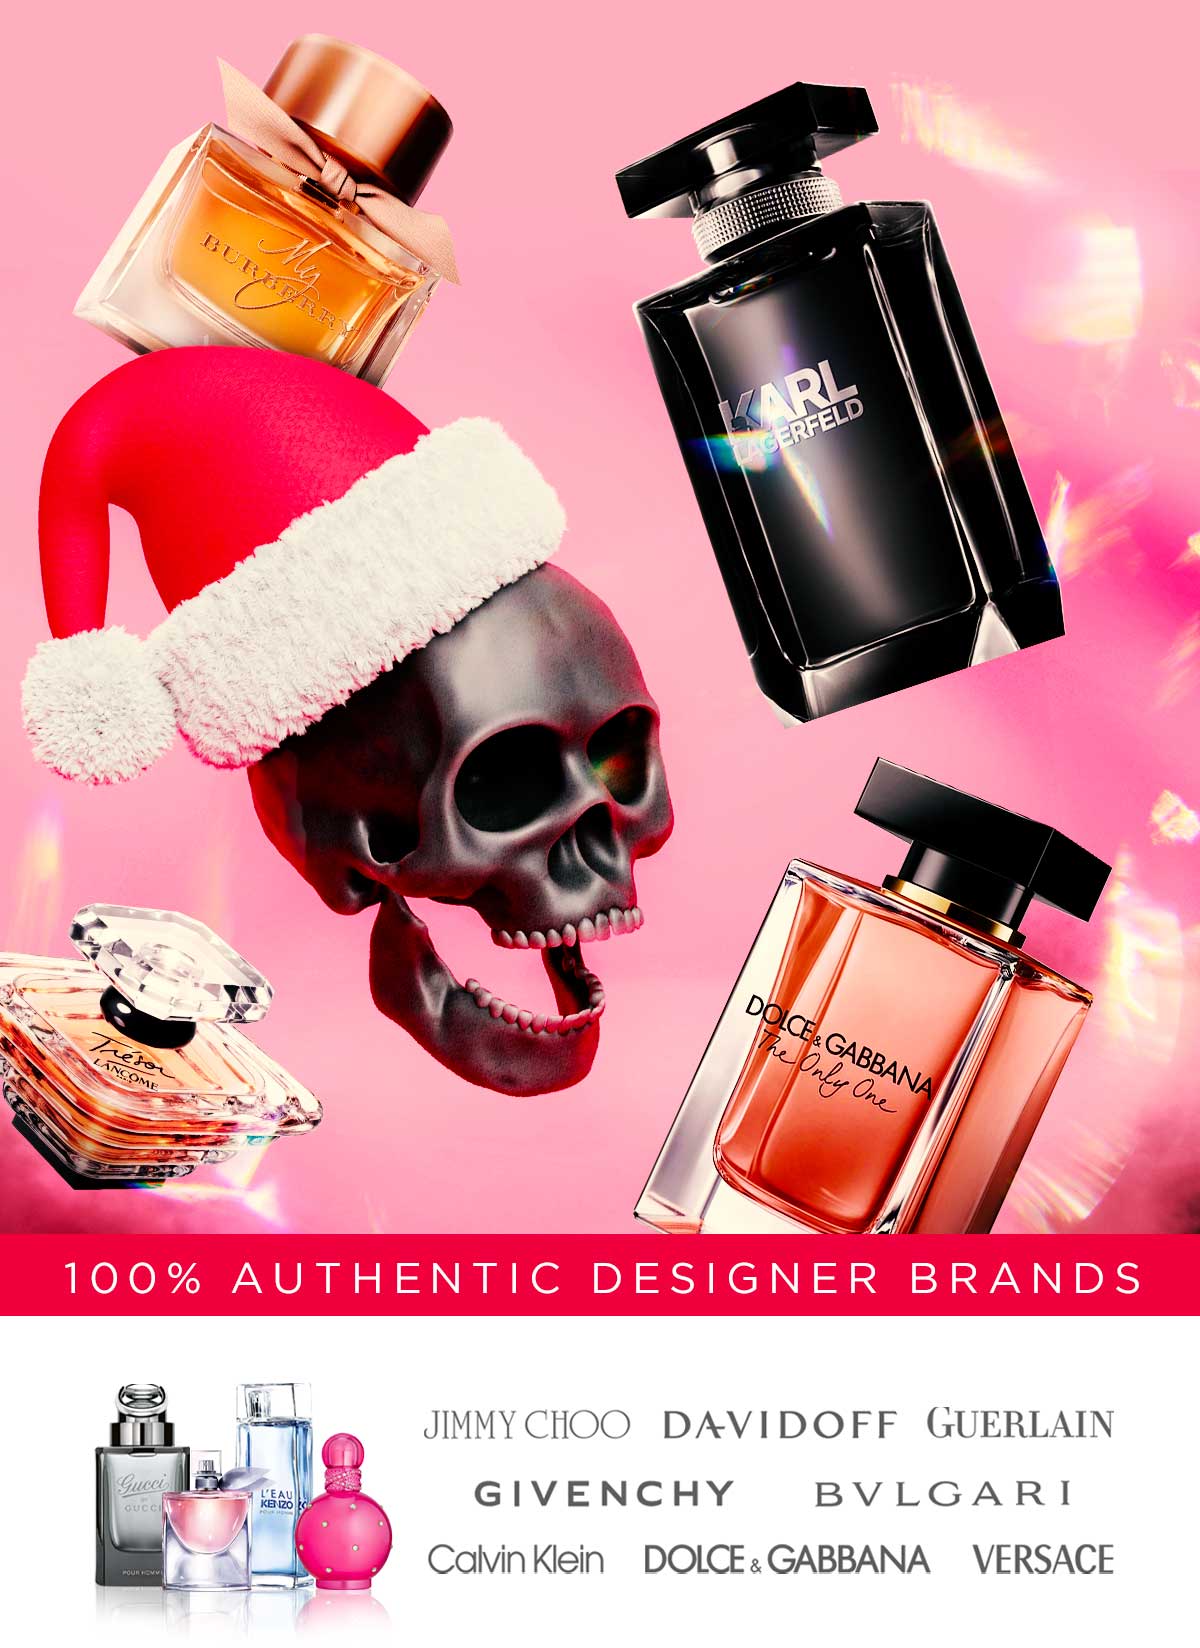 A skull wearing a Santa hat crashes through fragrances warning that there are 60 days until Christmas